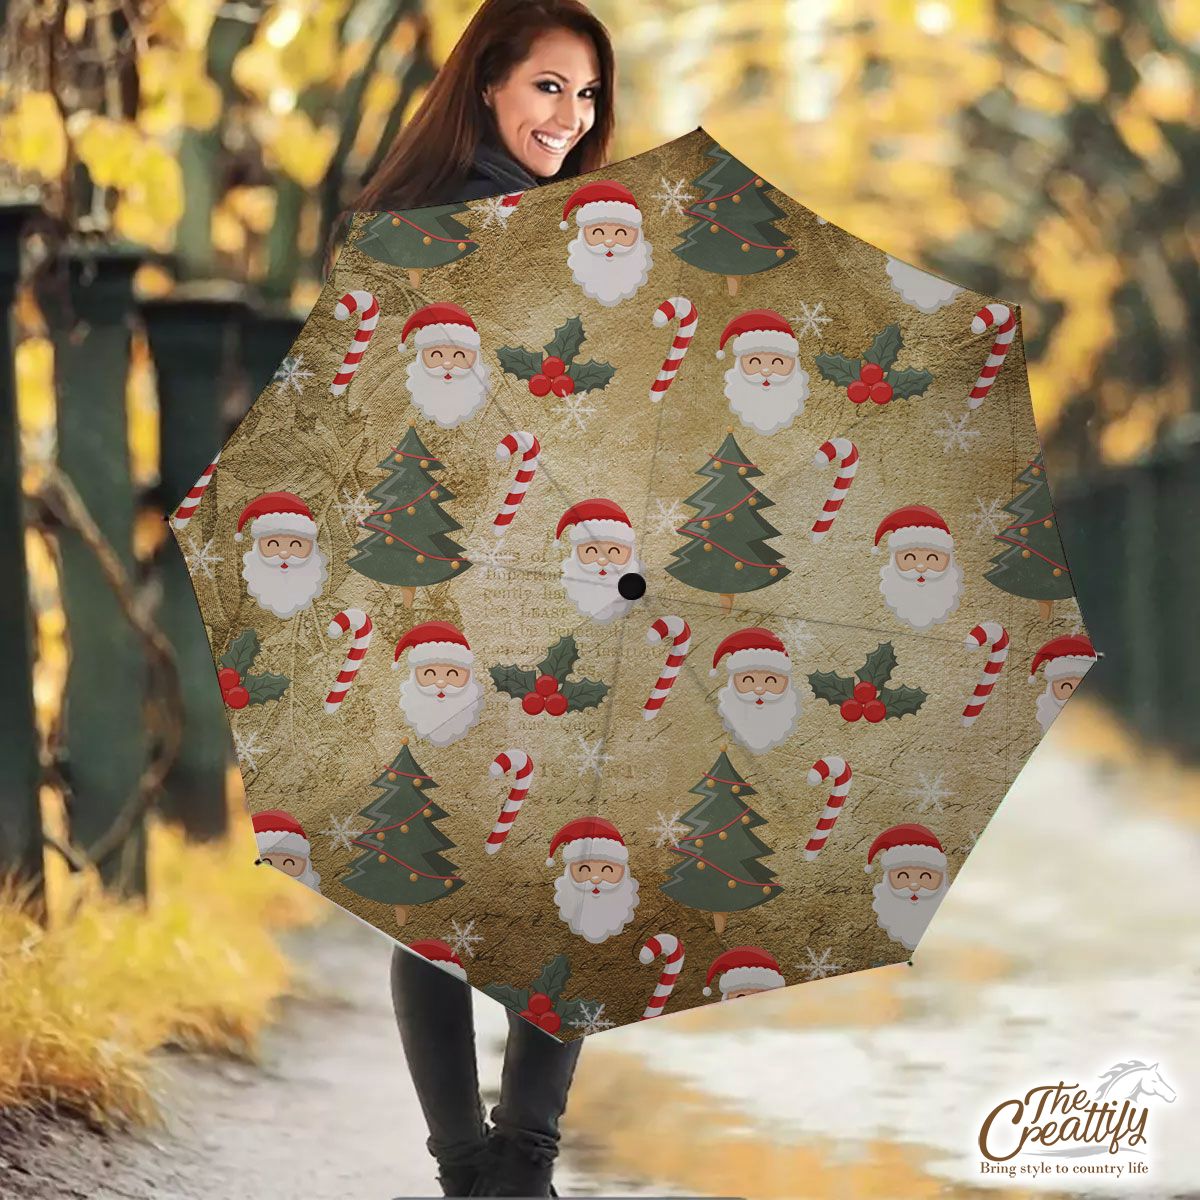 Santa Clause, Candy Canes And Holly Leaf, Pine Tree Umbrella